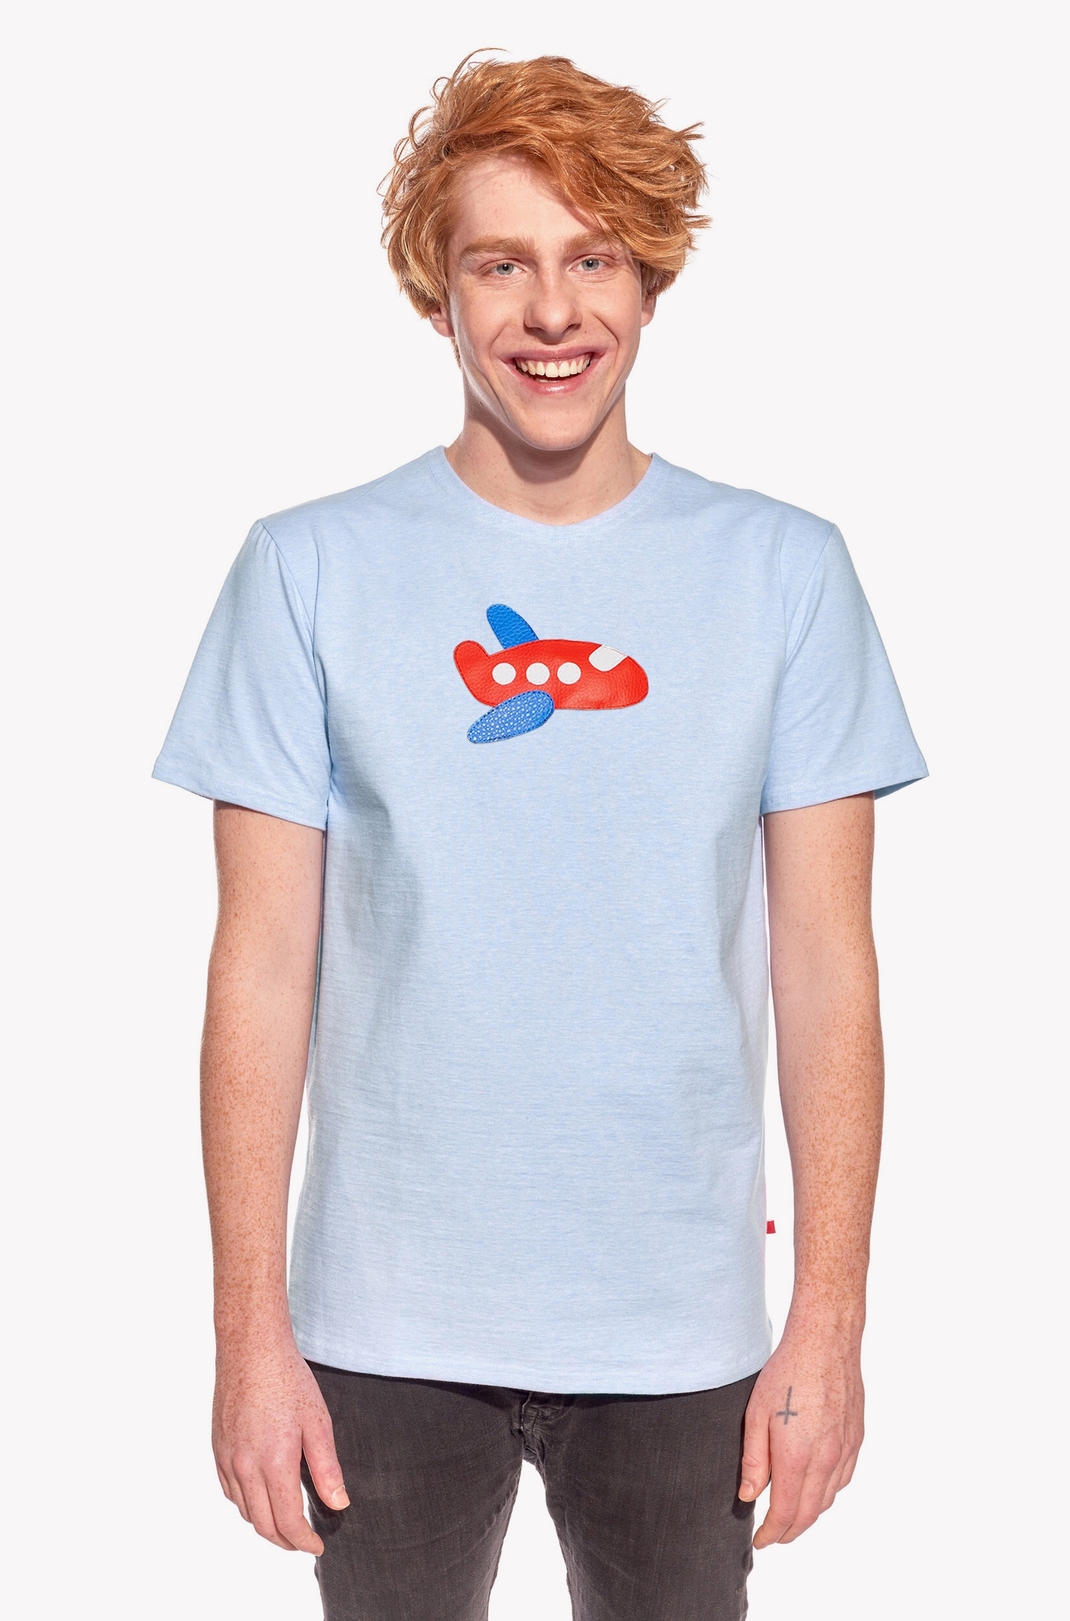 Shirt with an airplane